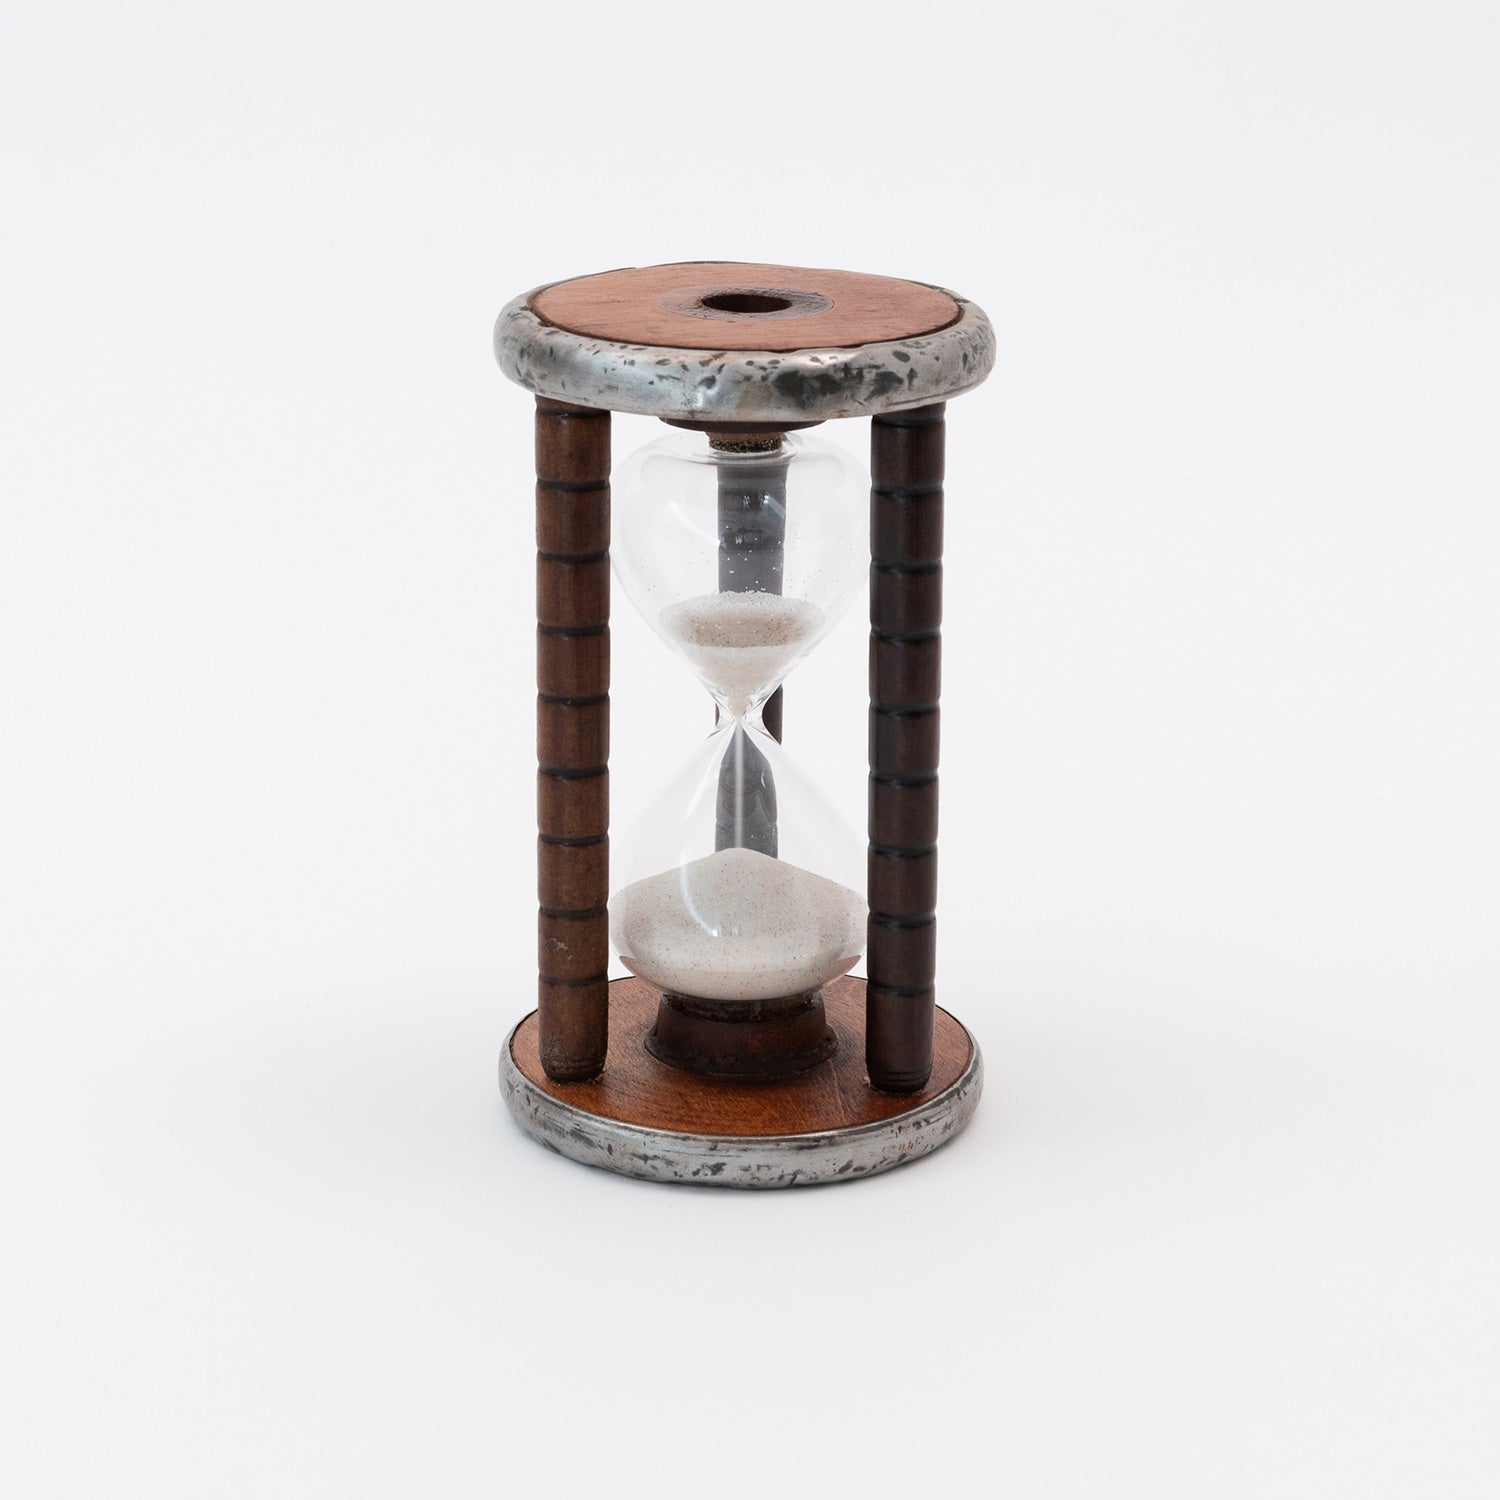 White sand falling through the glass egg timer with a wooden and metal bobbin case.